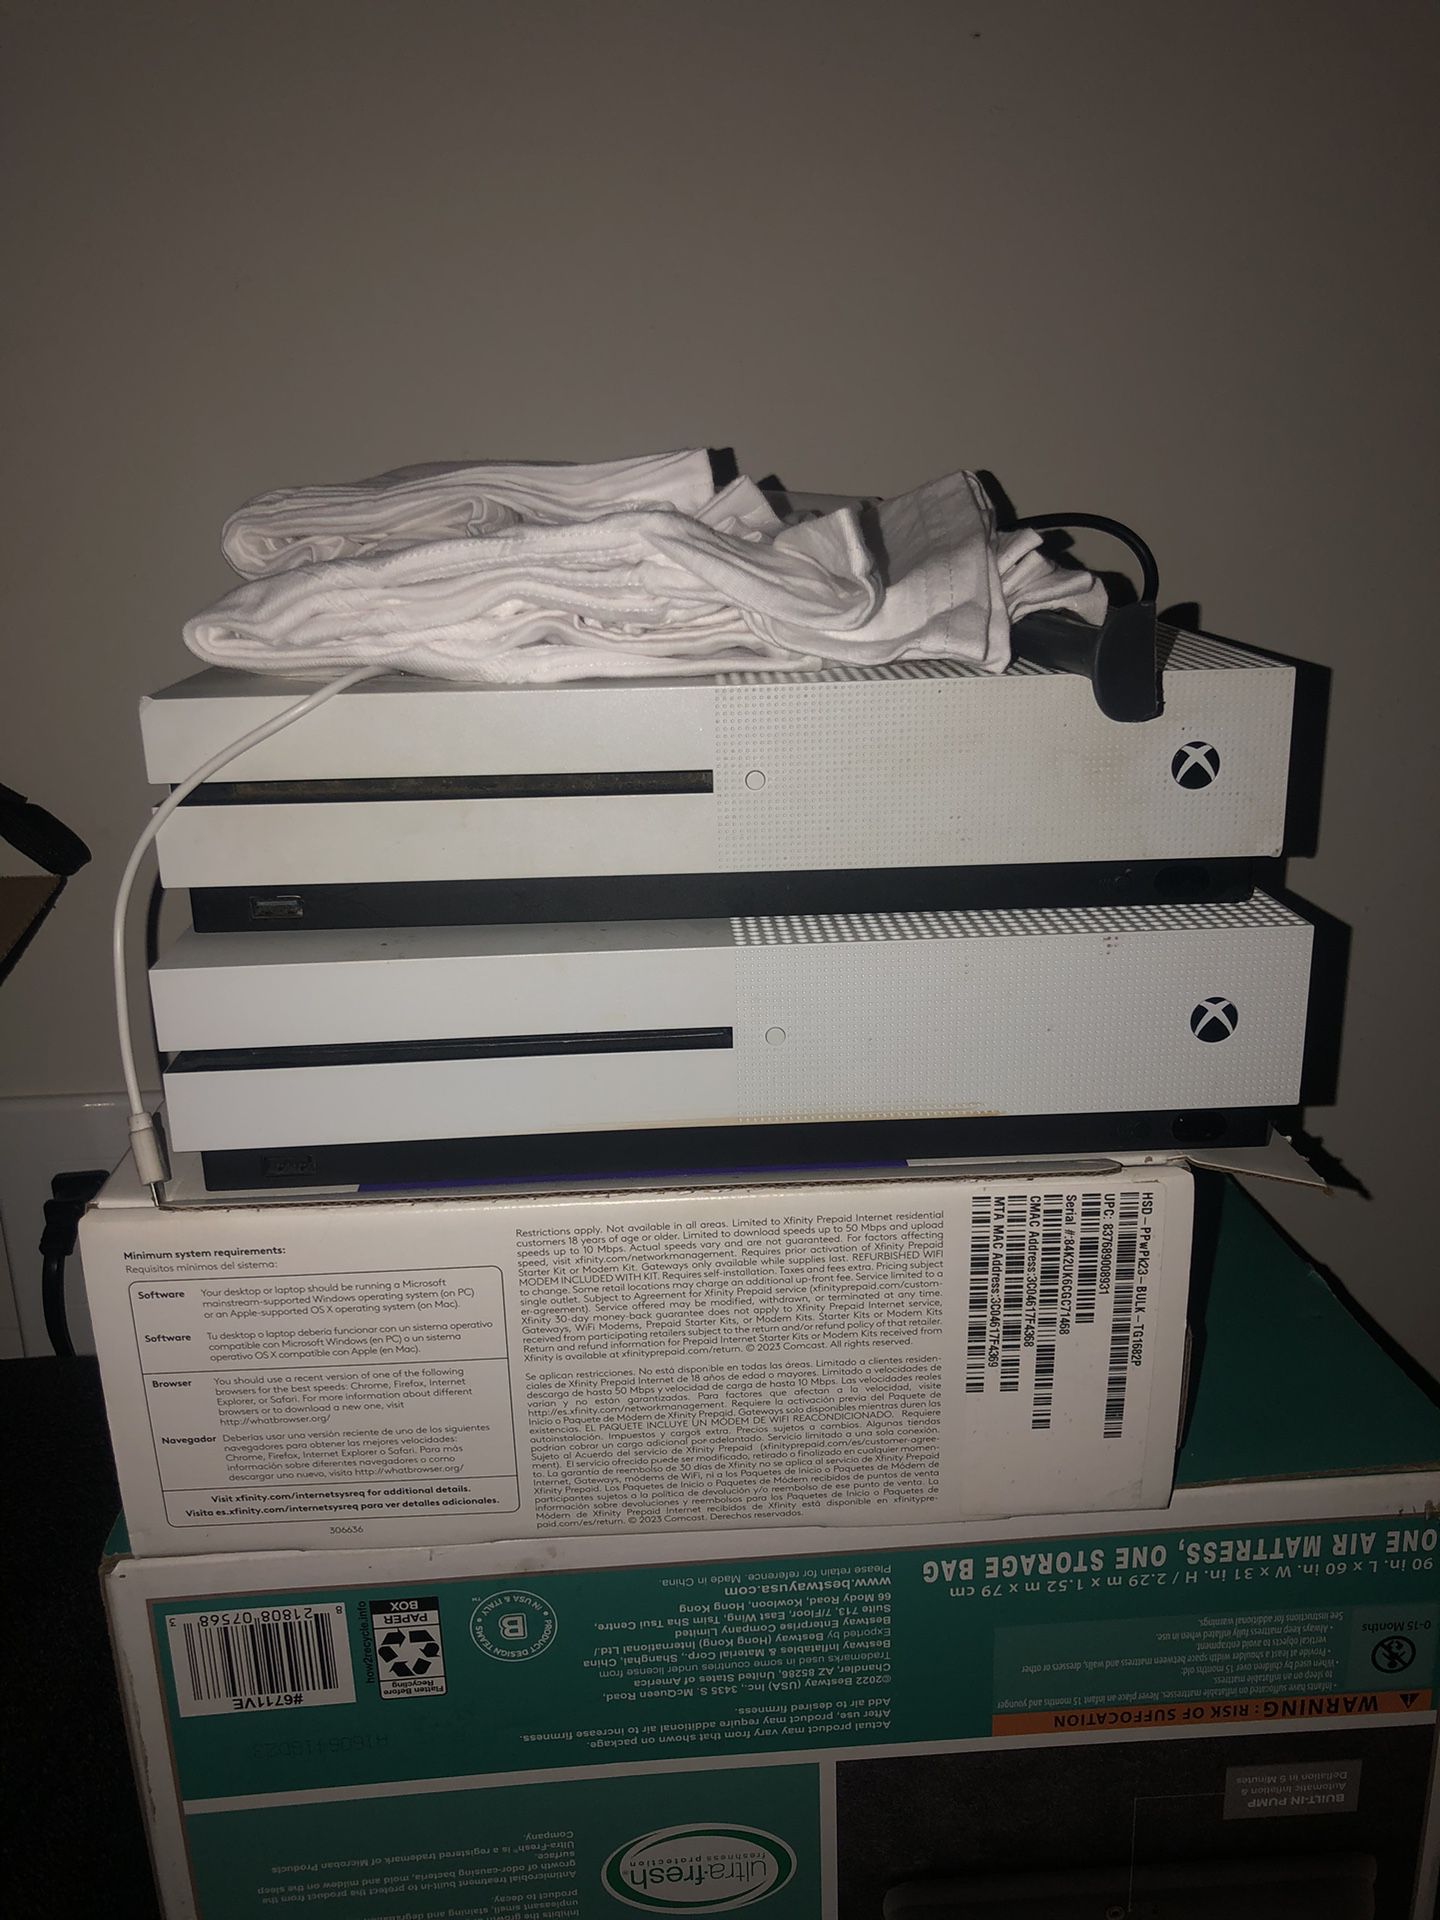 Xbox One S System Only 